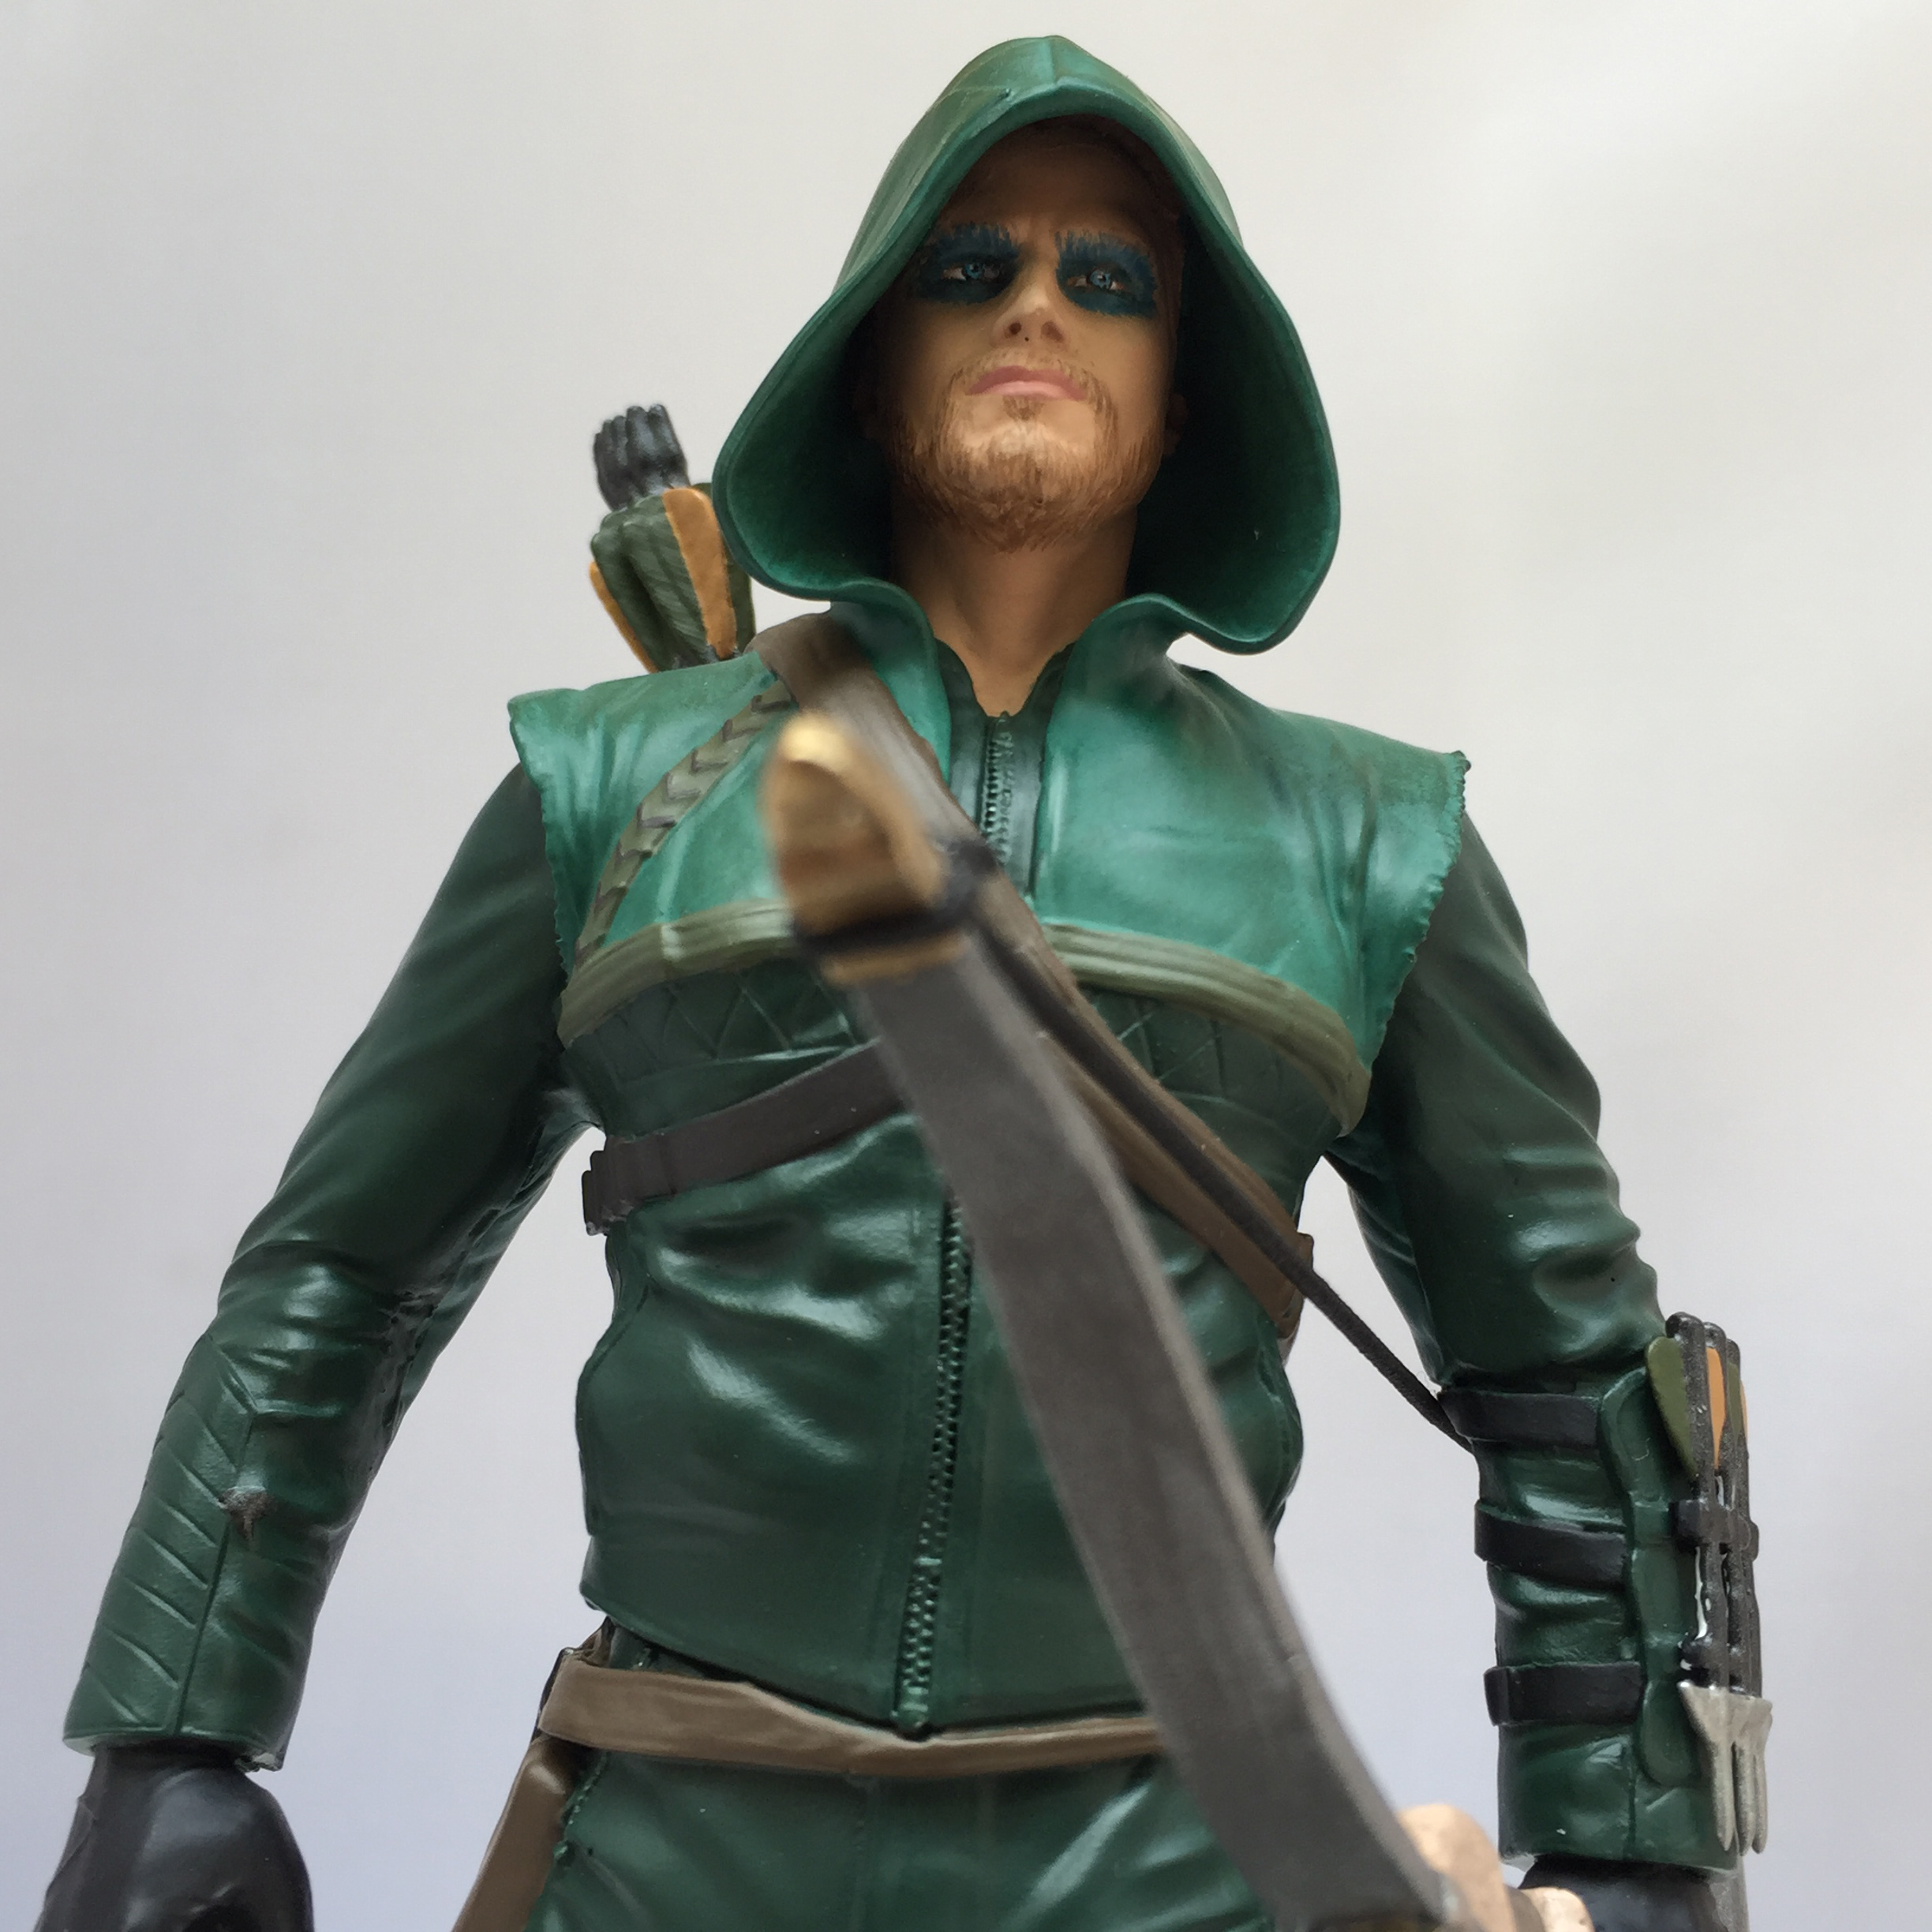 STK6834122 Exclusive Stephen Amell Arrow and Grant Gustin Flash Statues Revealed